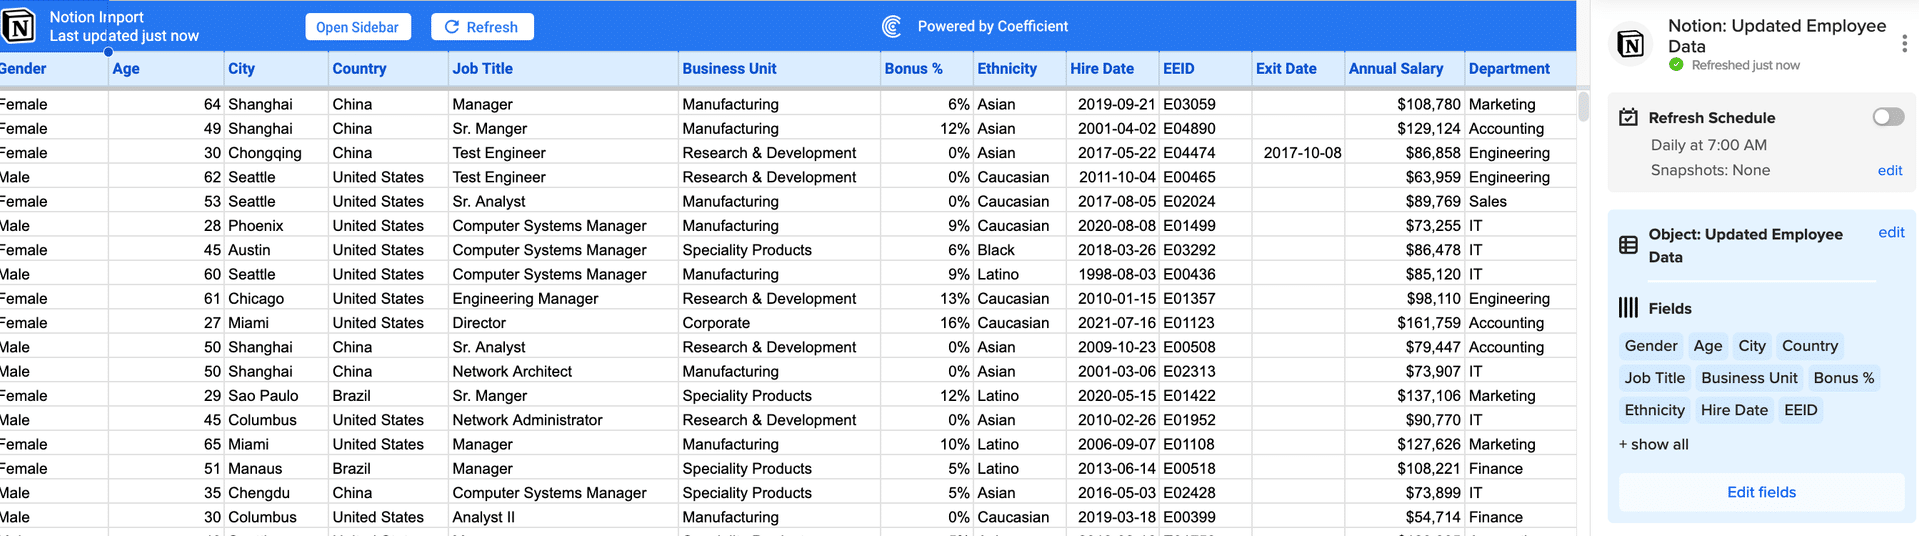 Auto-populating Excel spreadsheet with exported data from Notion